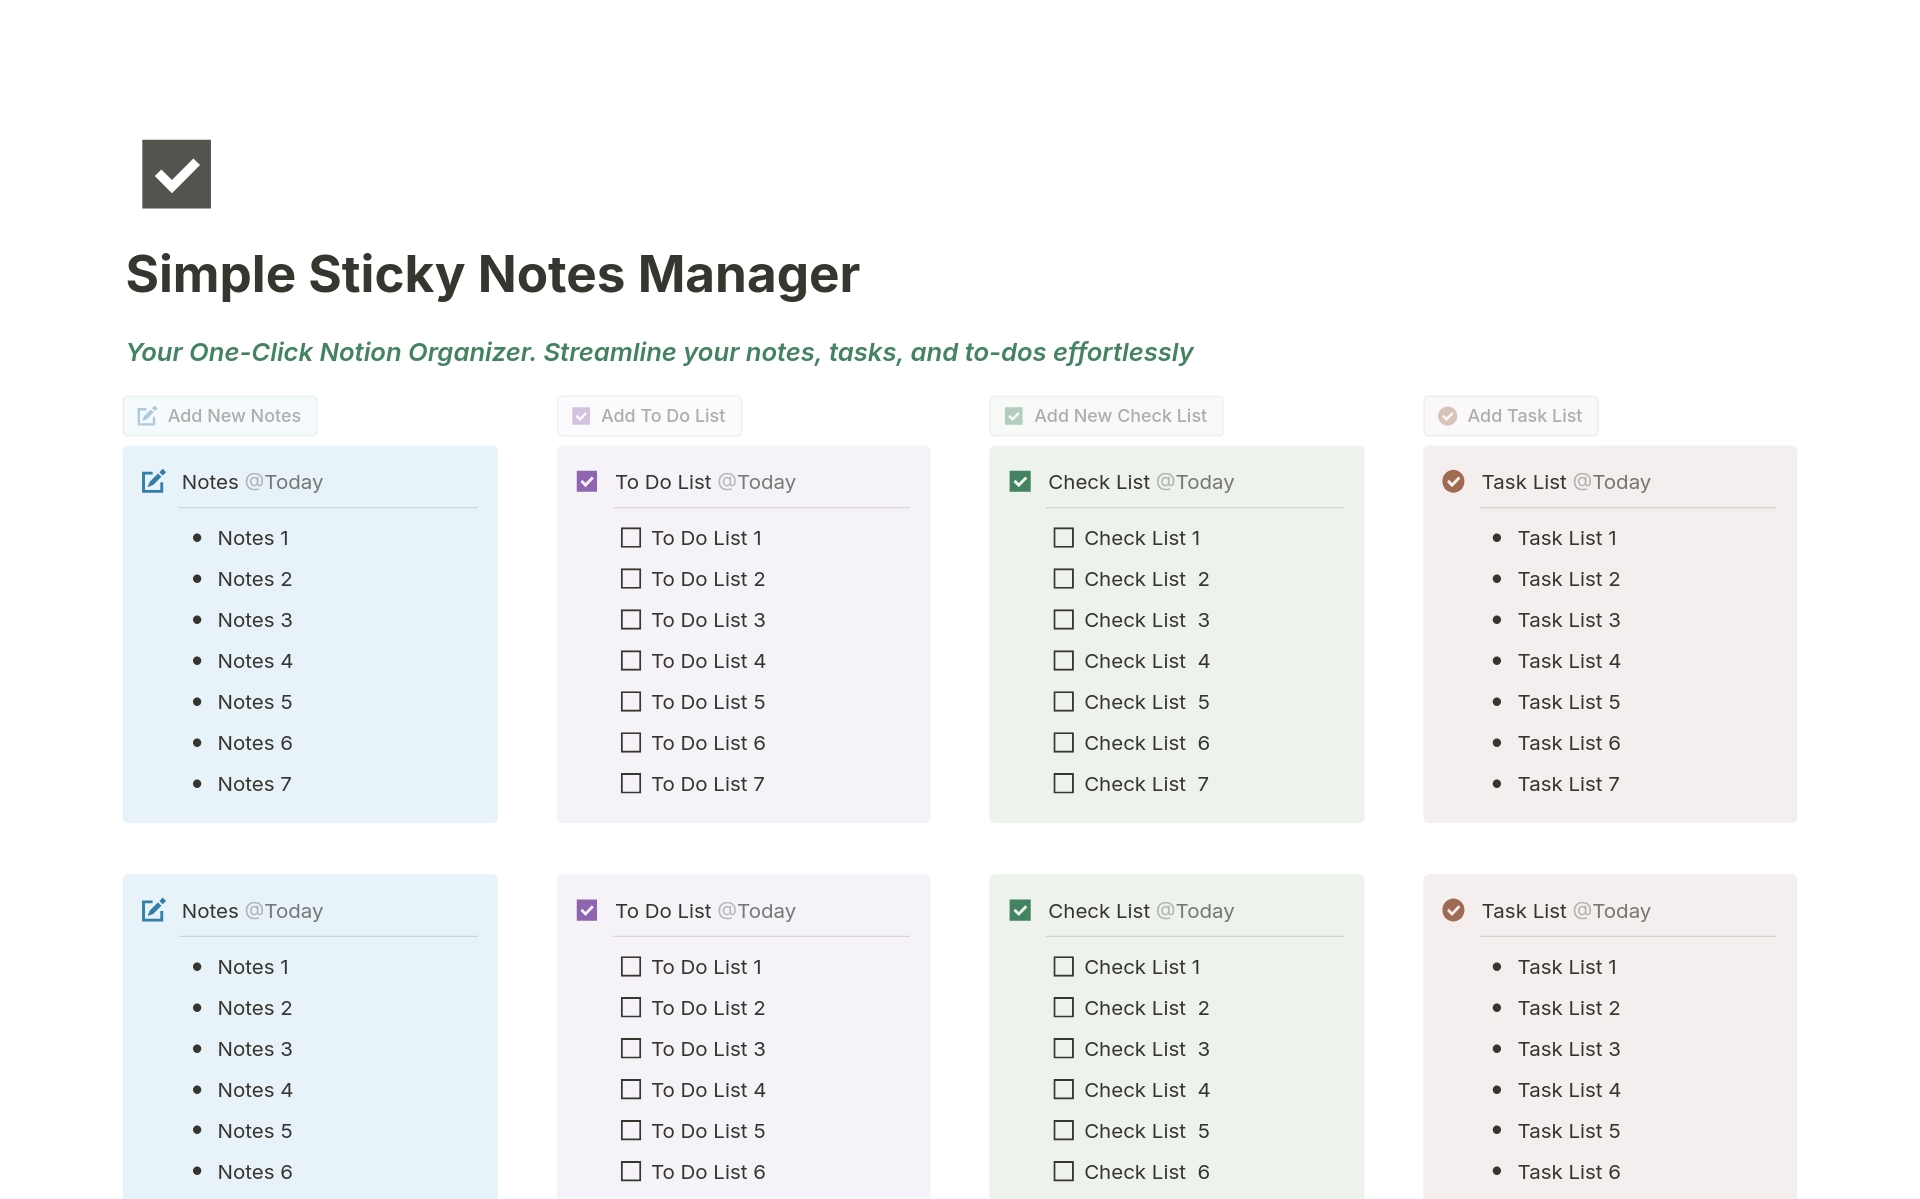 Introducing Simple Sticky Notes Manager, your ultimate companion for effortless organization within Notion. This intuitive template empowers you to streamline your notes, tasks, and to-dos with just one click, revolutionizing the way you manage your digital workspace.